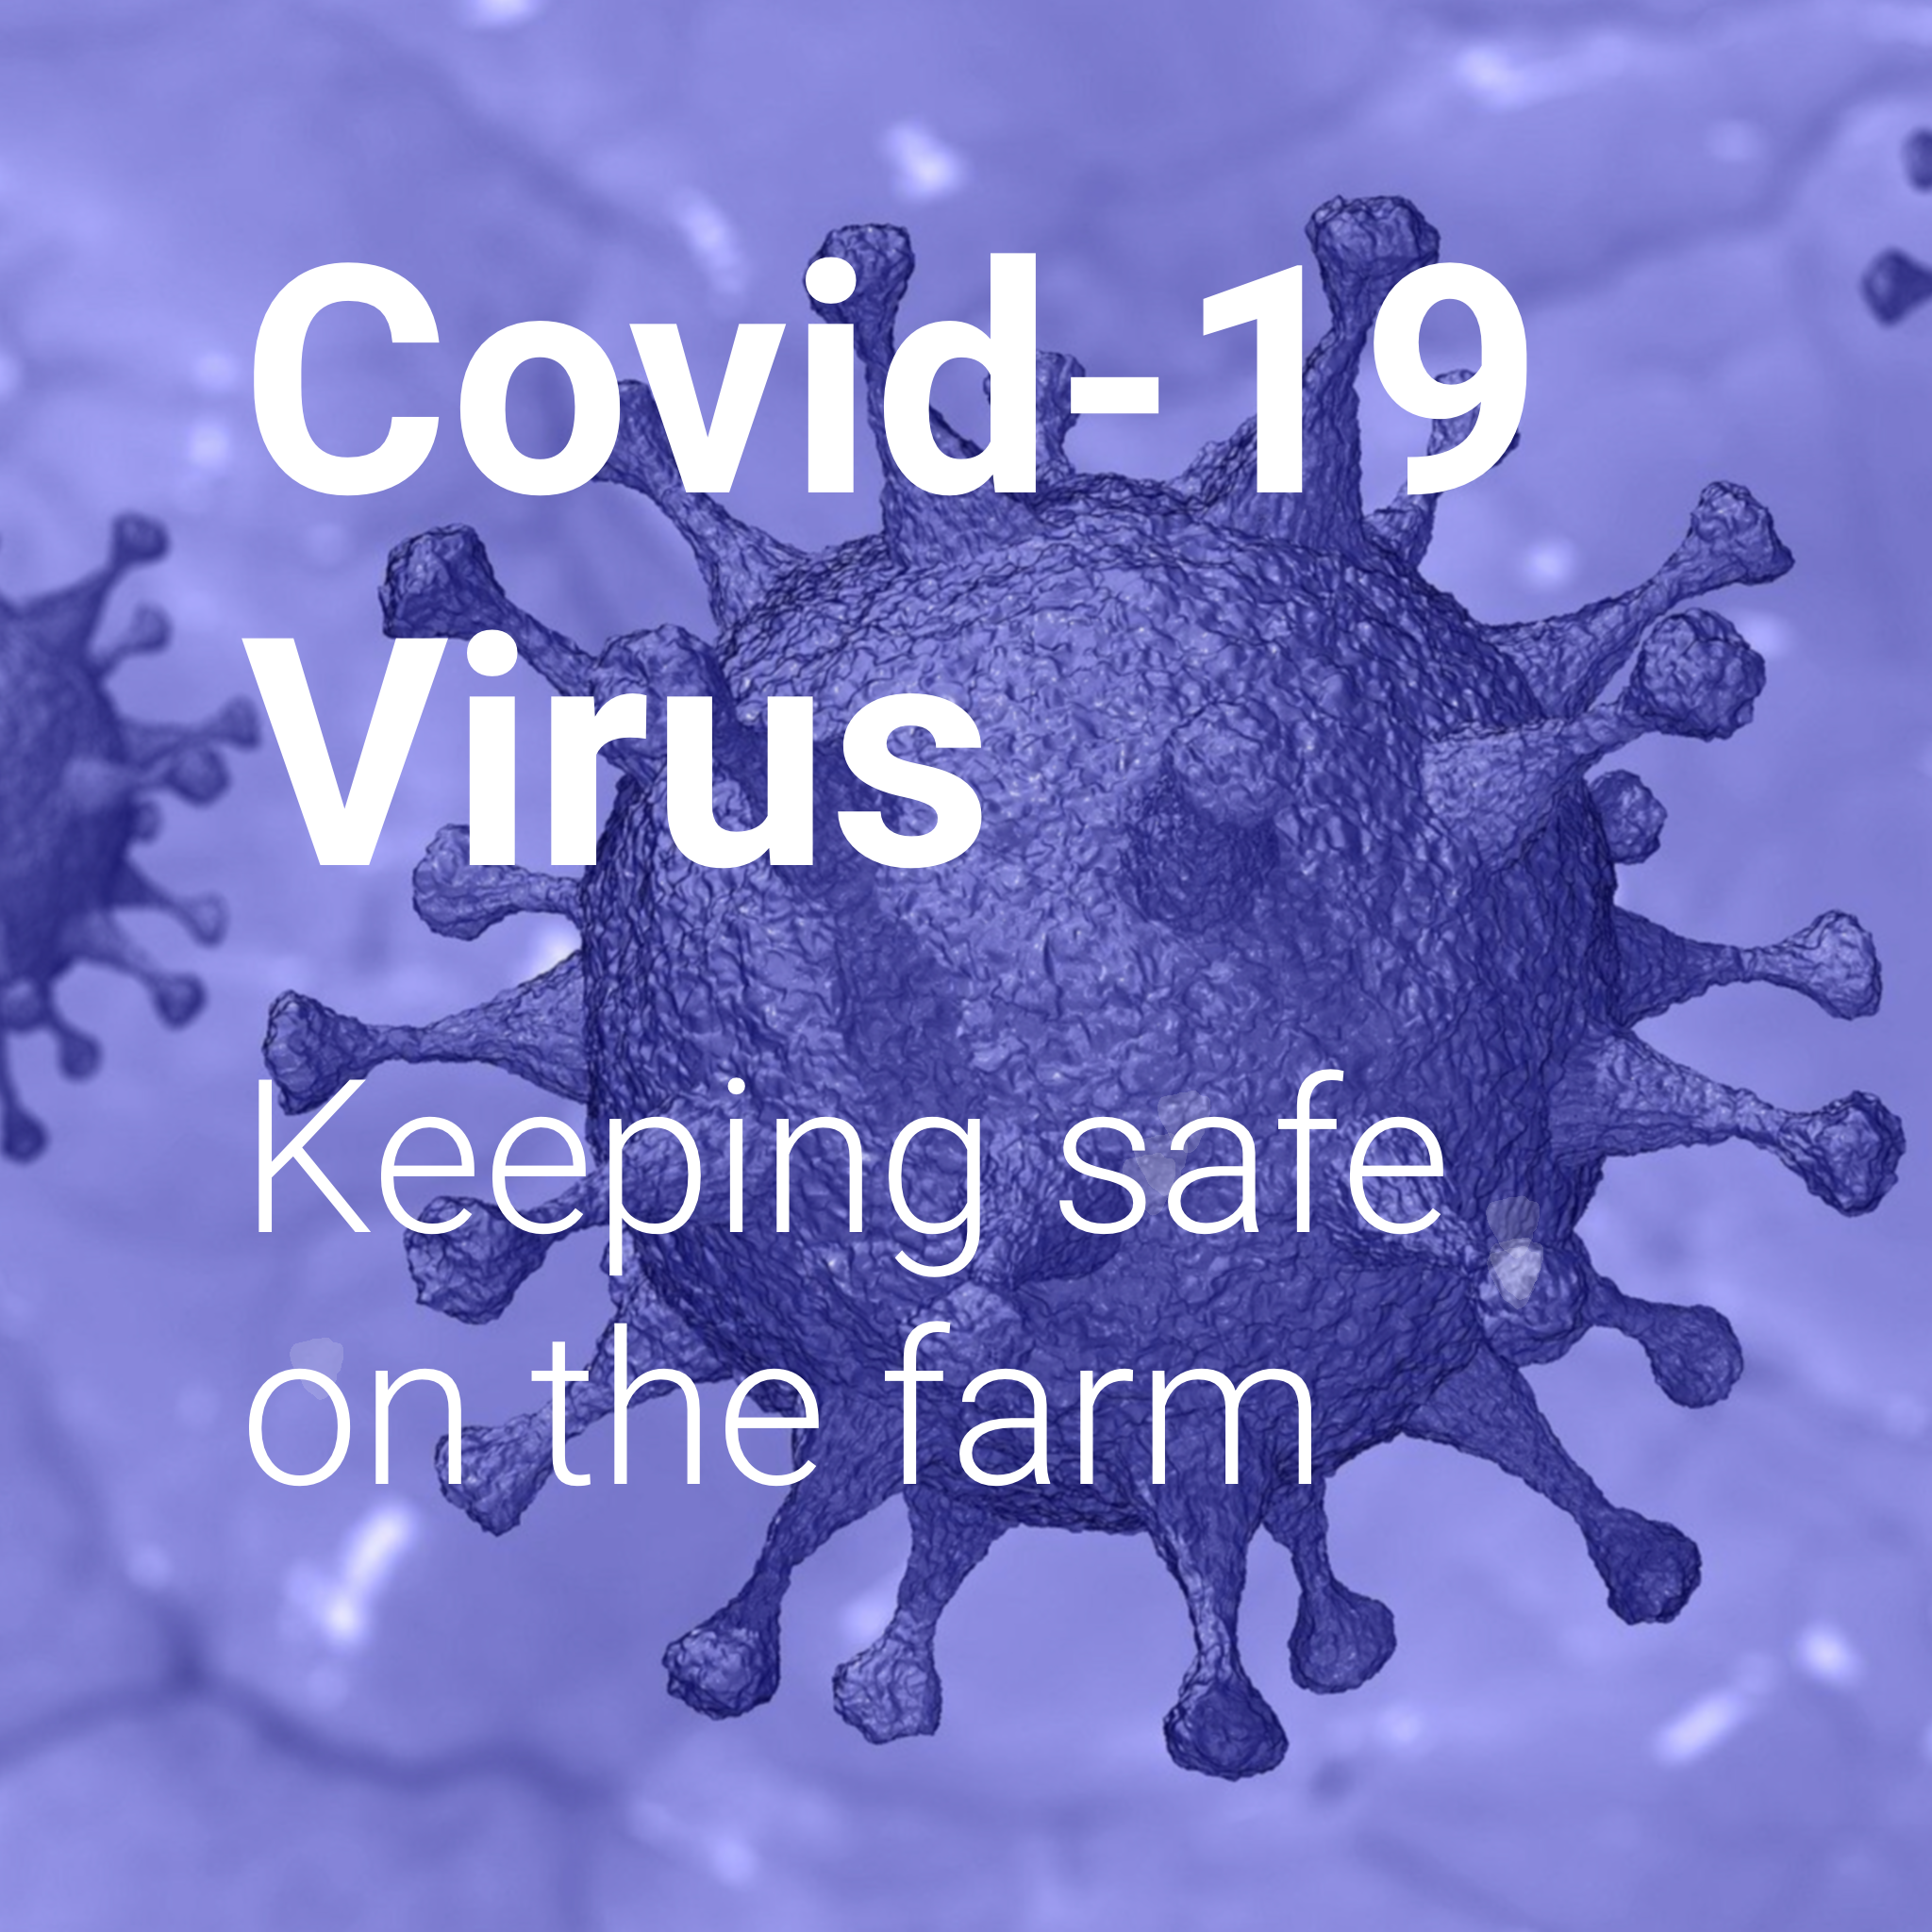 Keeping safe from Covid-19 on the farm